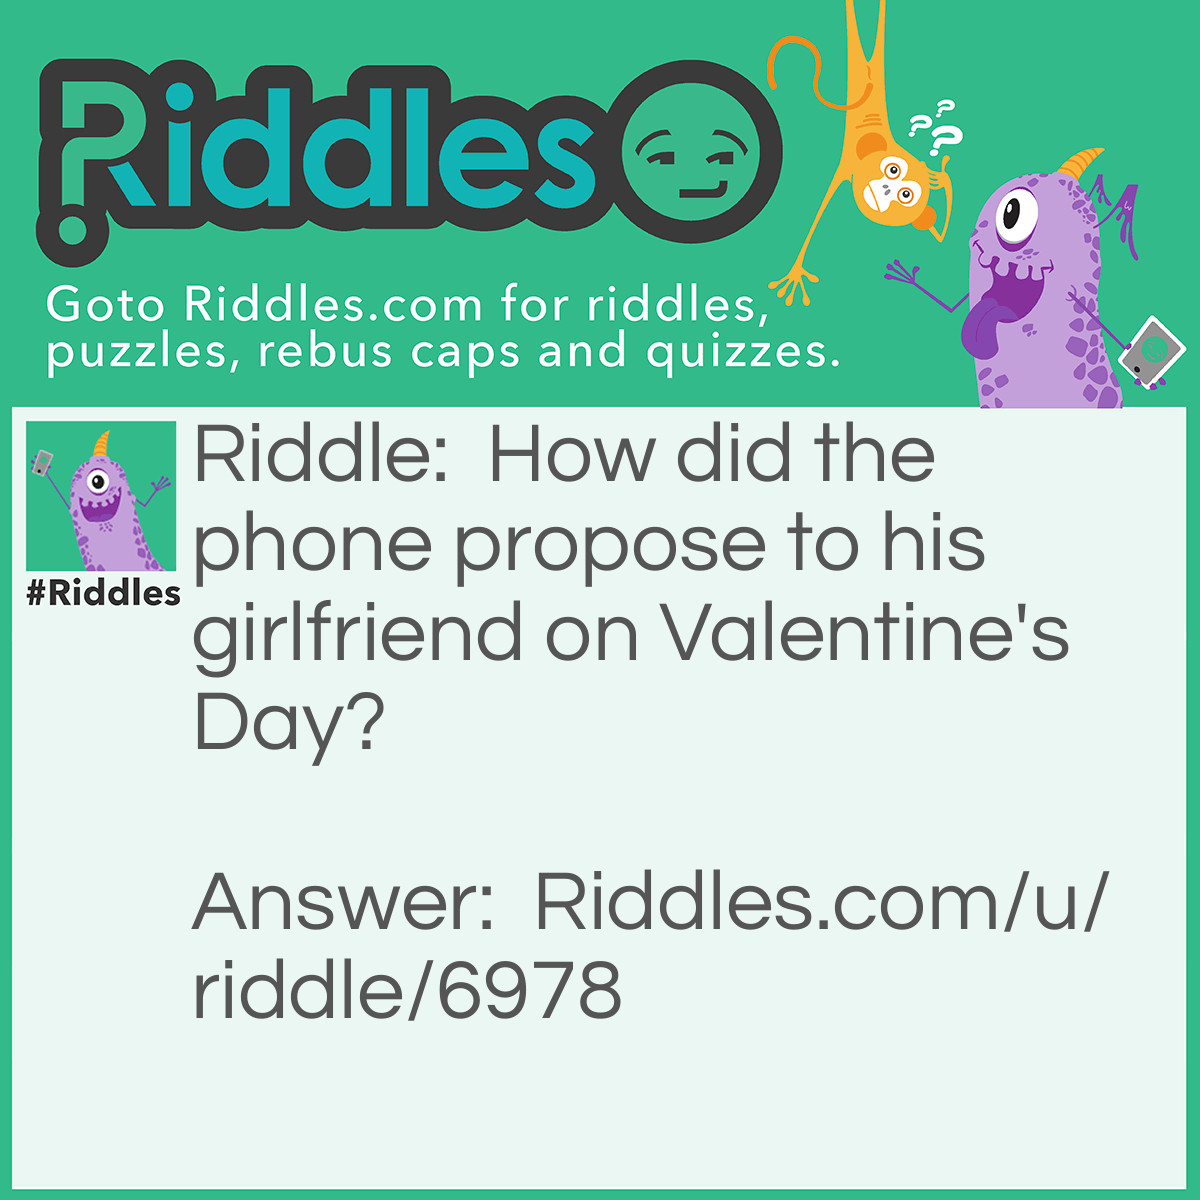 Riddle: How did the phone propose to his girlfriend on Valentine's Day? Answer: He gave her a "ring".